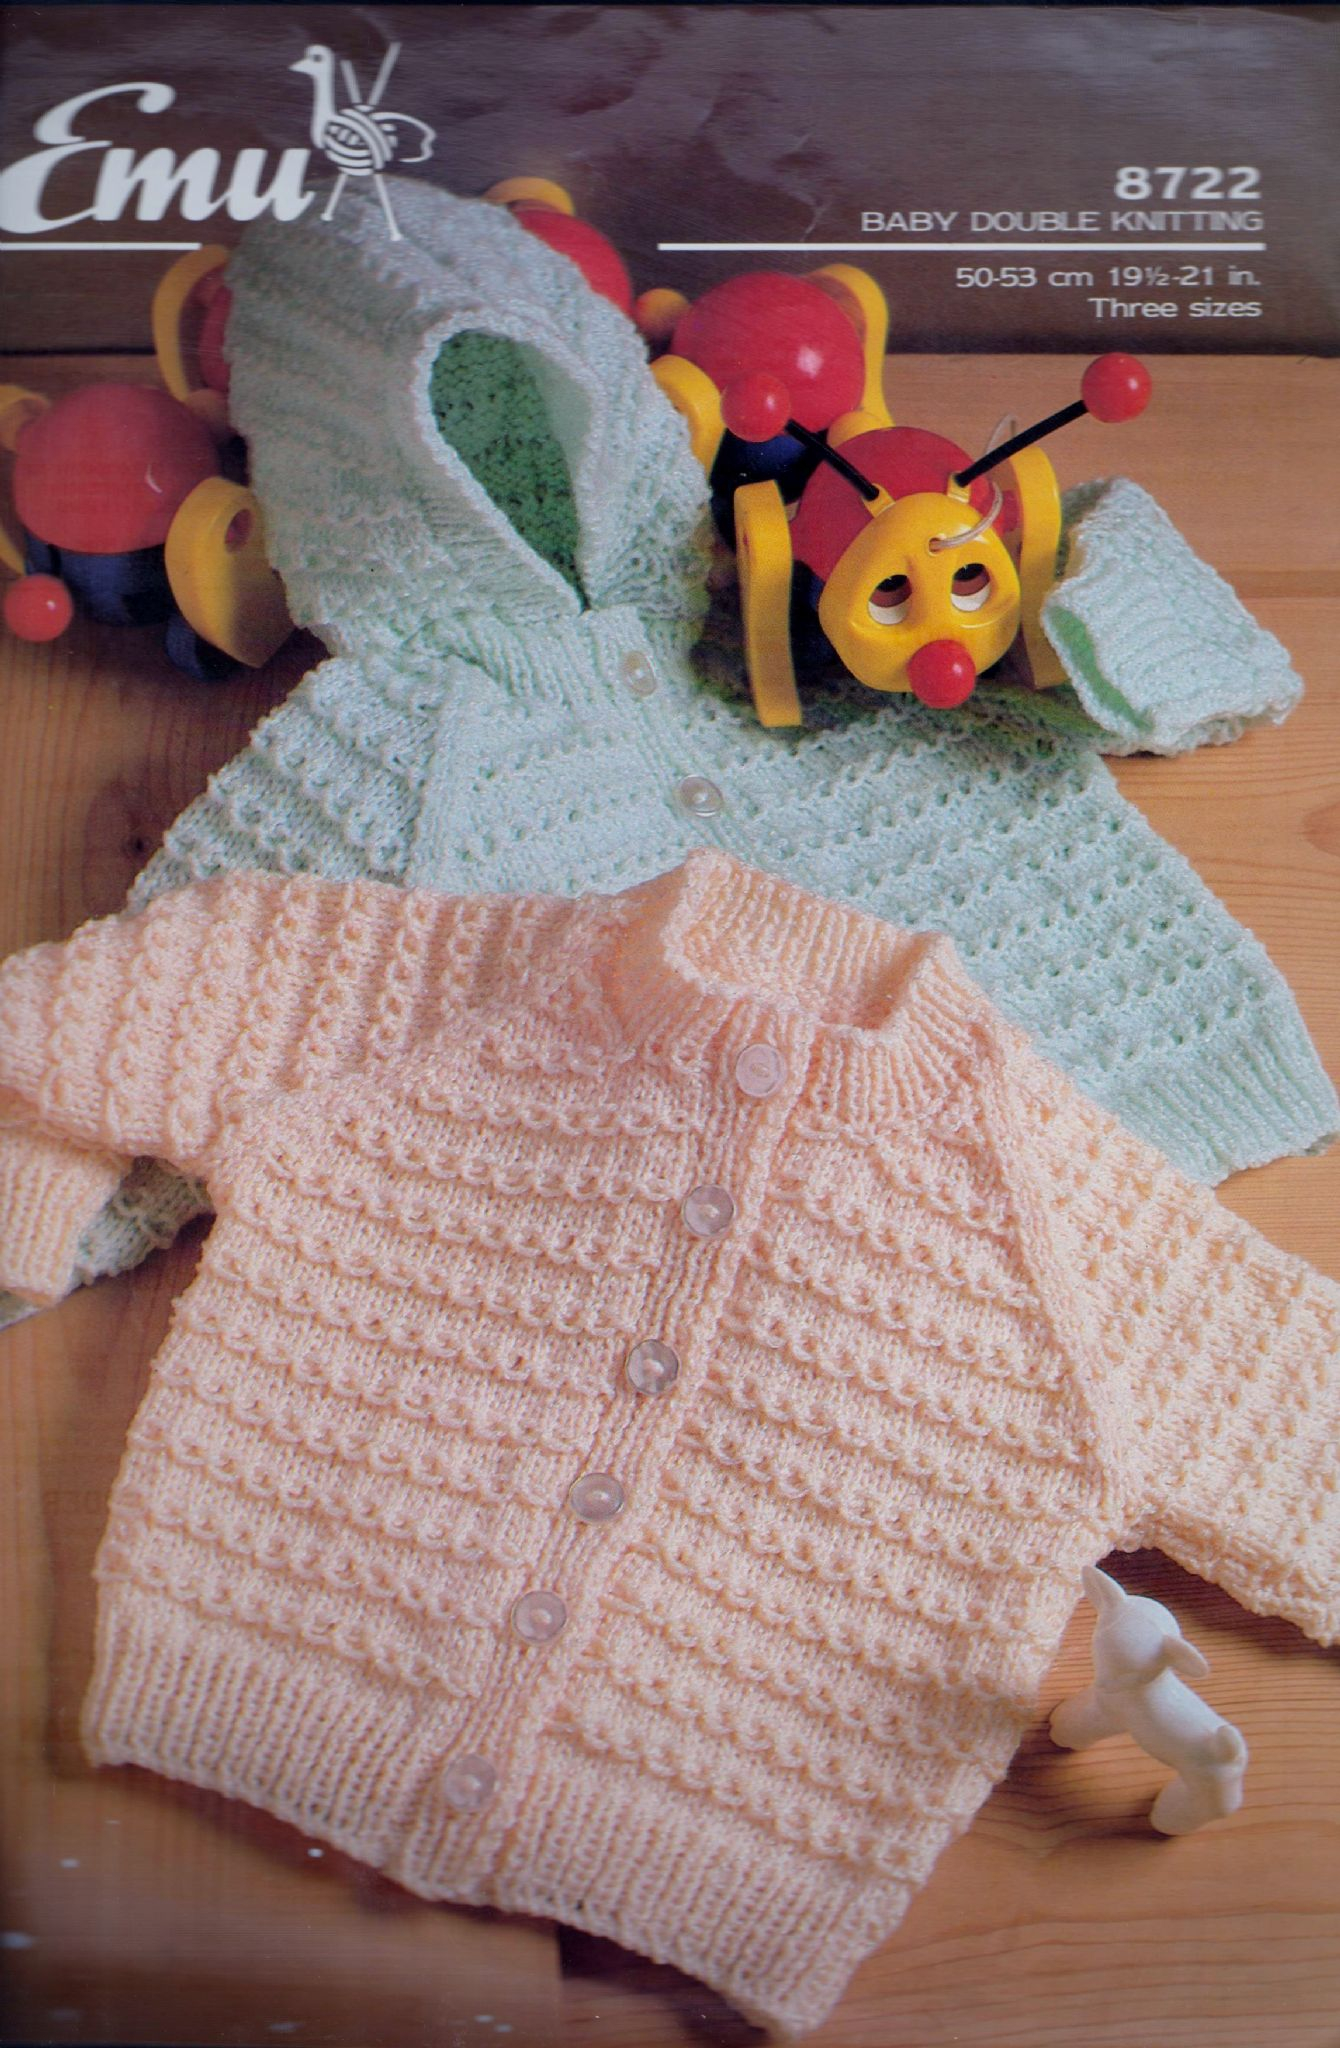 Double Knitting Baby Patterns Double Knitting Patterns To Download